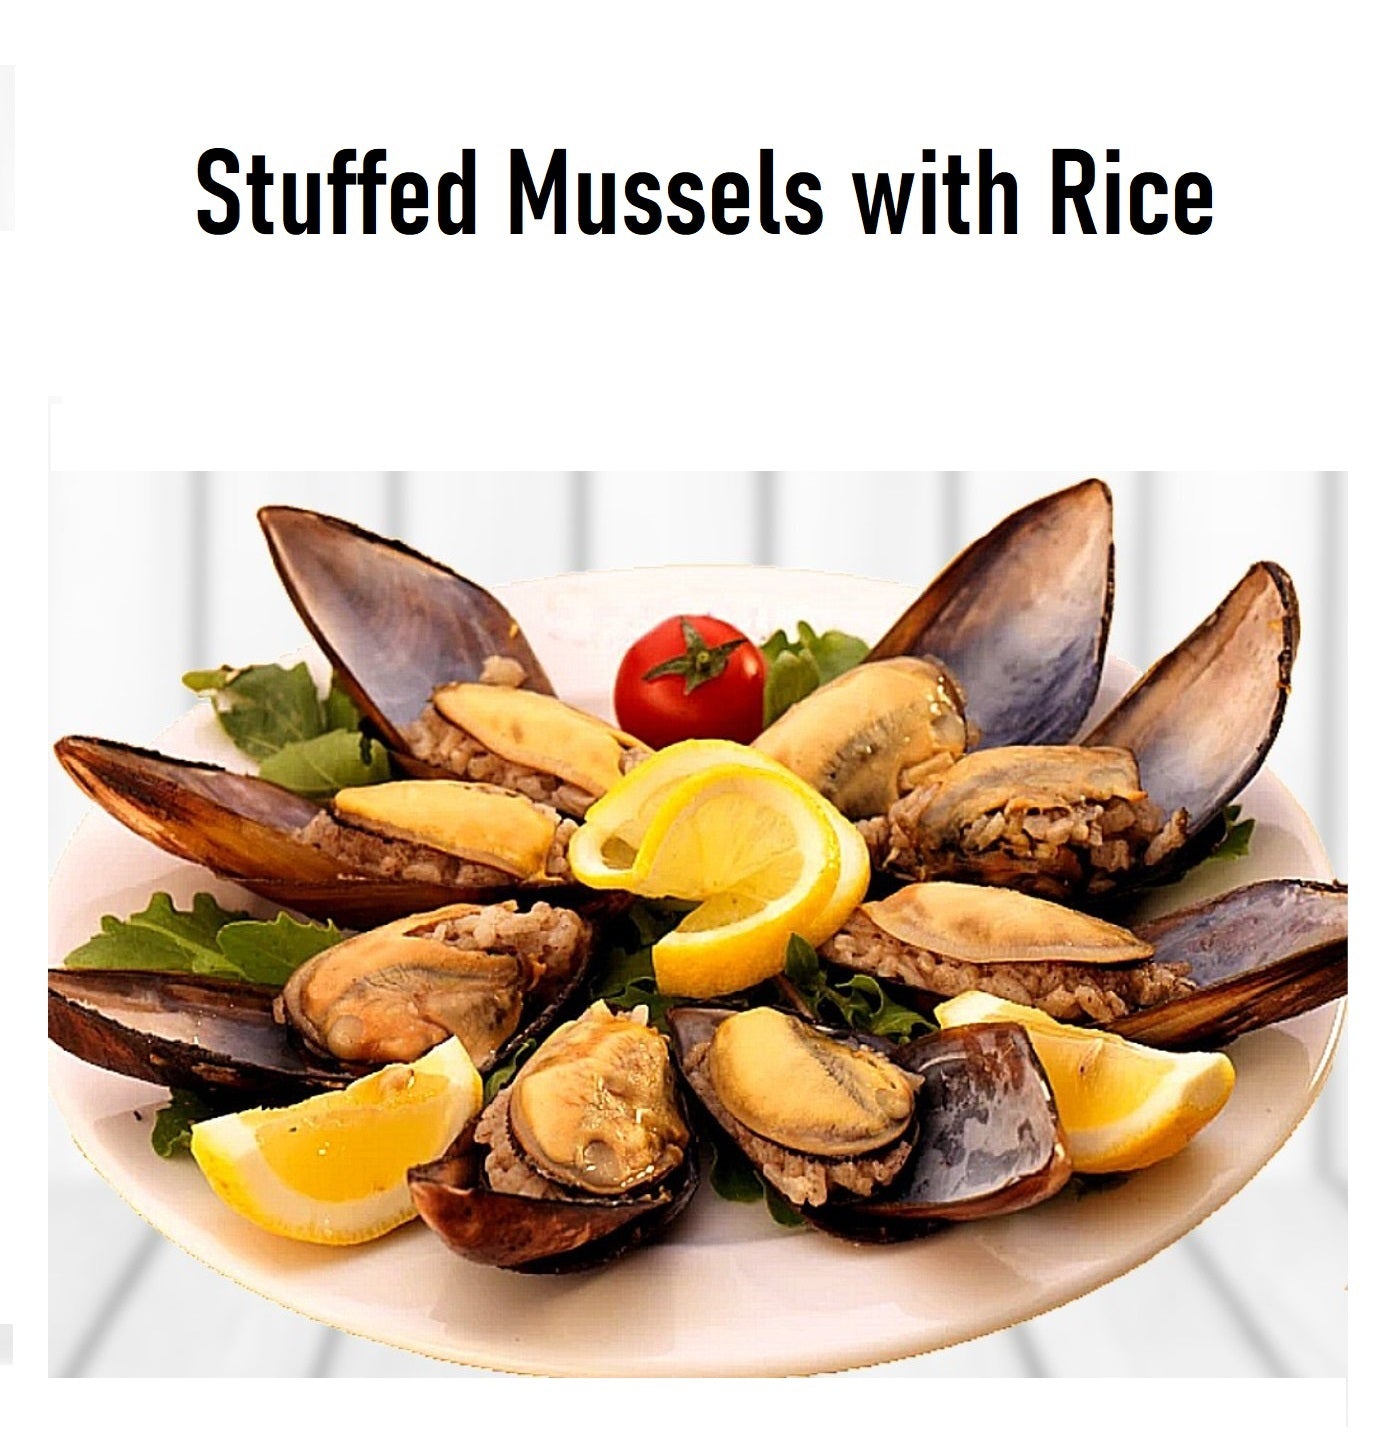 Stuffed mussels with rice